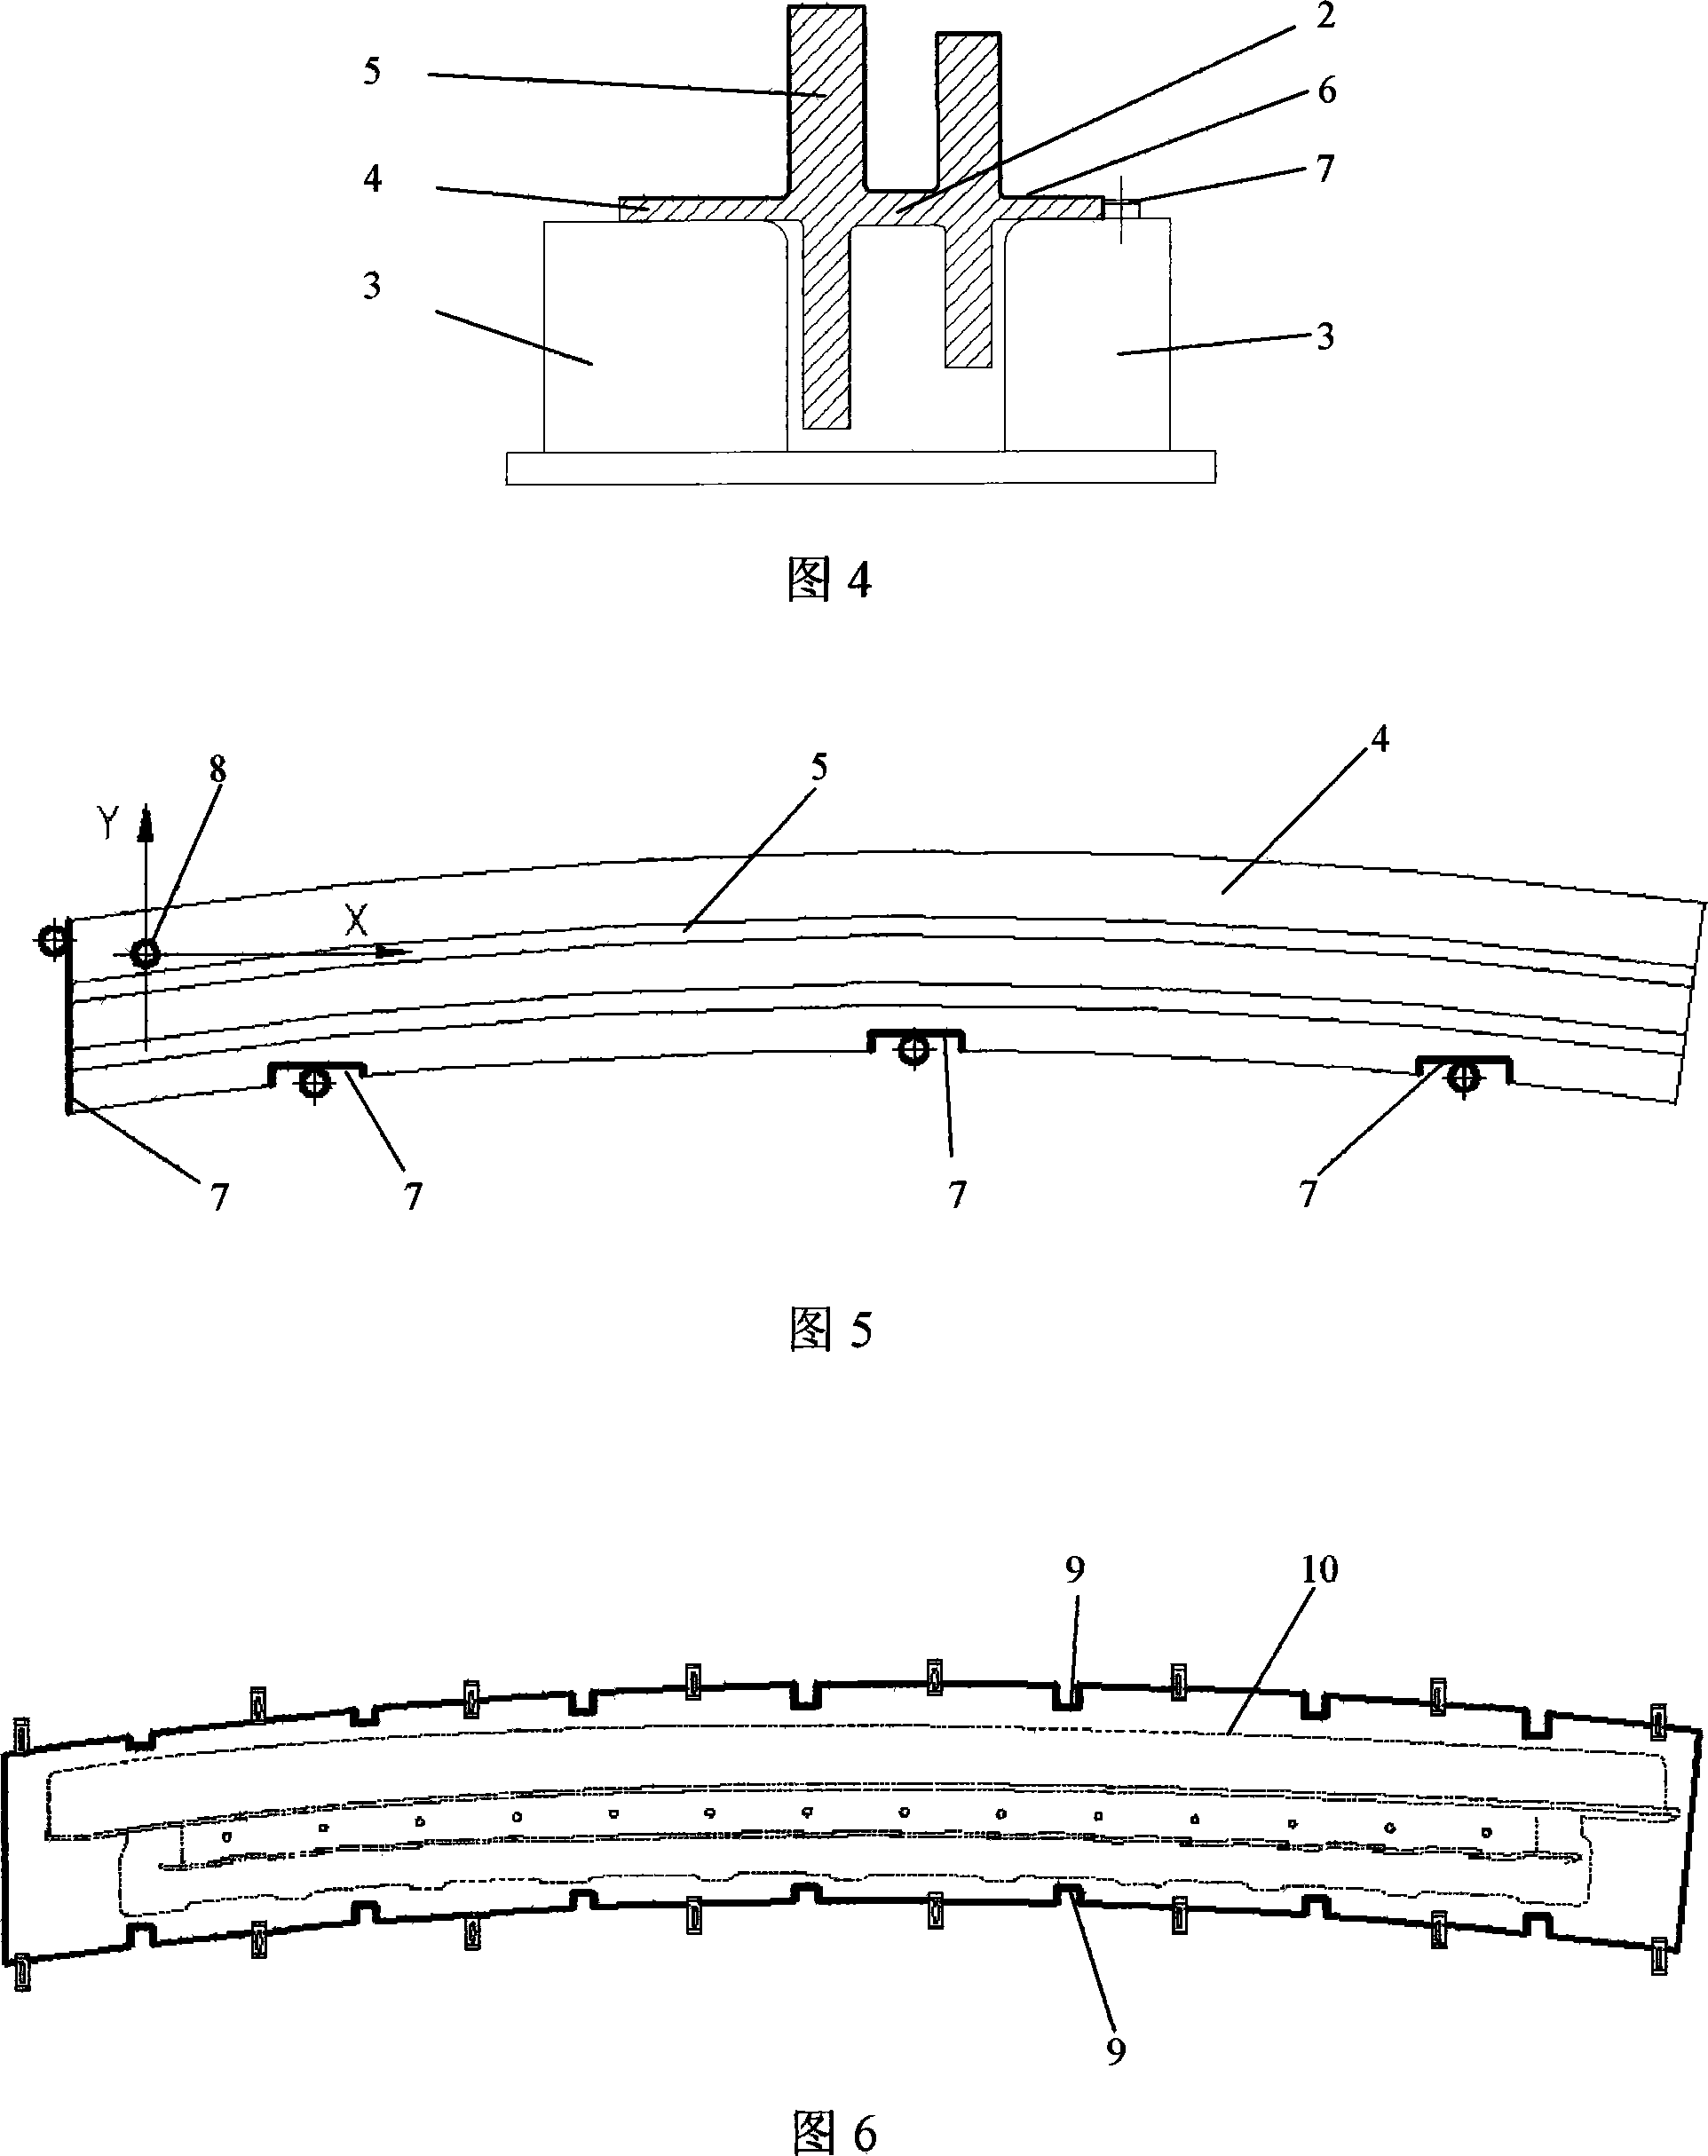 Numerically controlled processing method for plane wing rib beam part